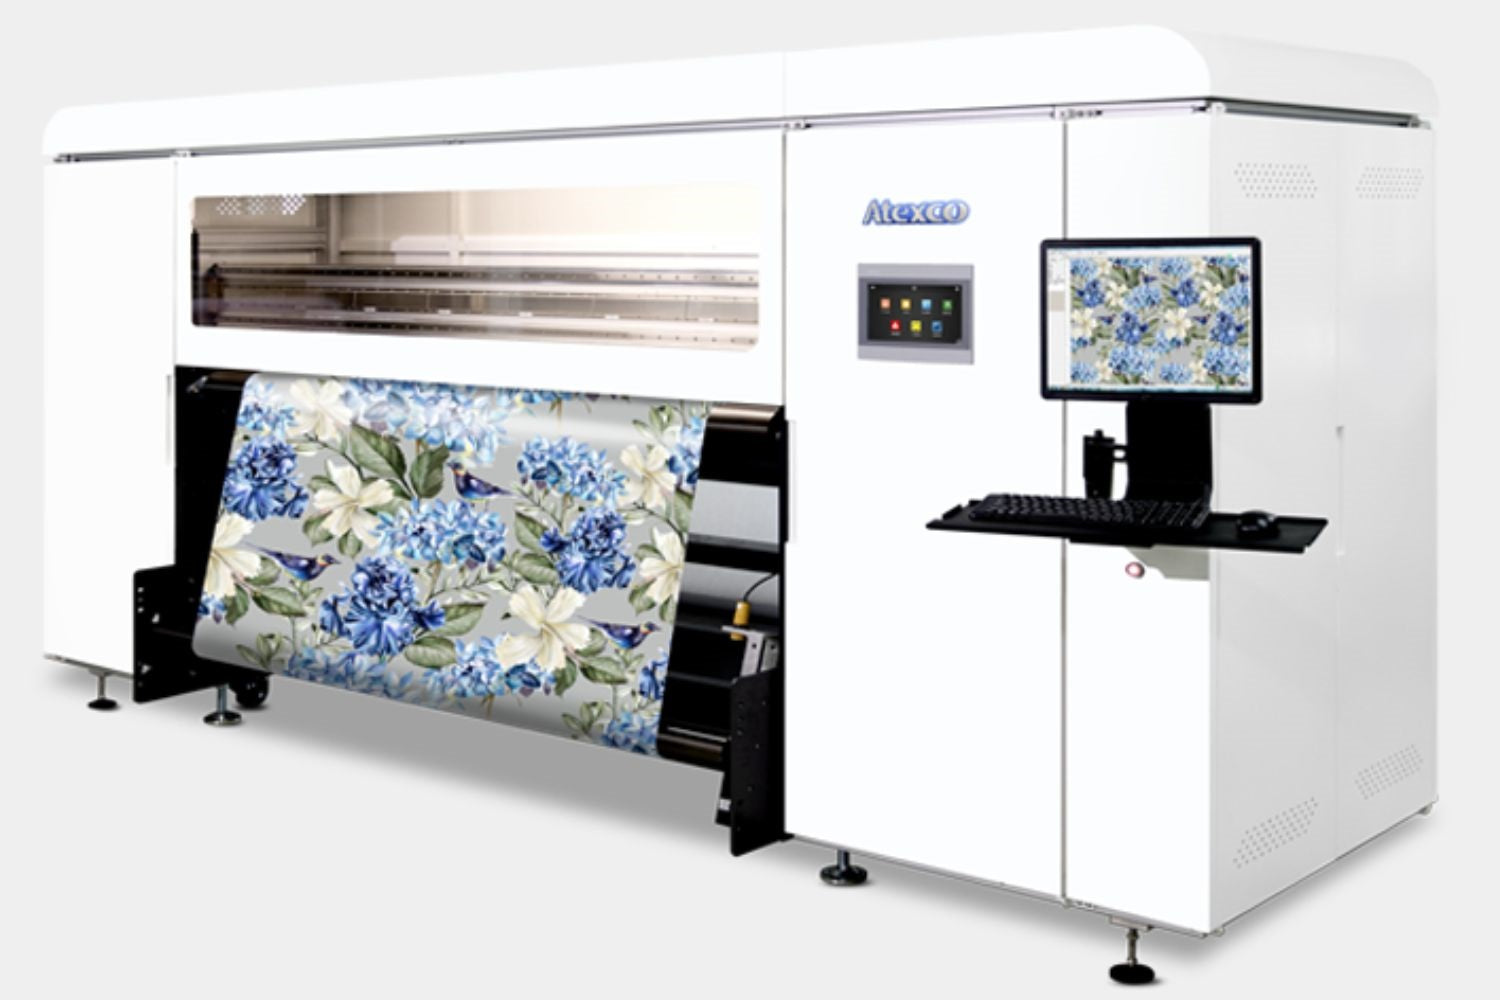 Sublimation printer from Atexco